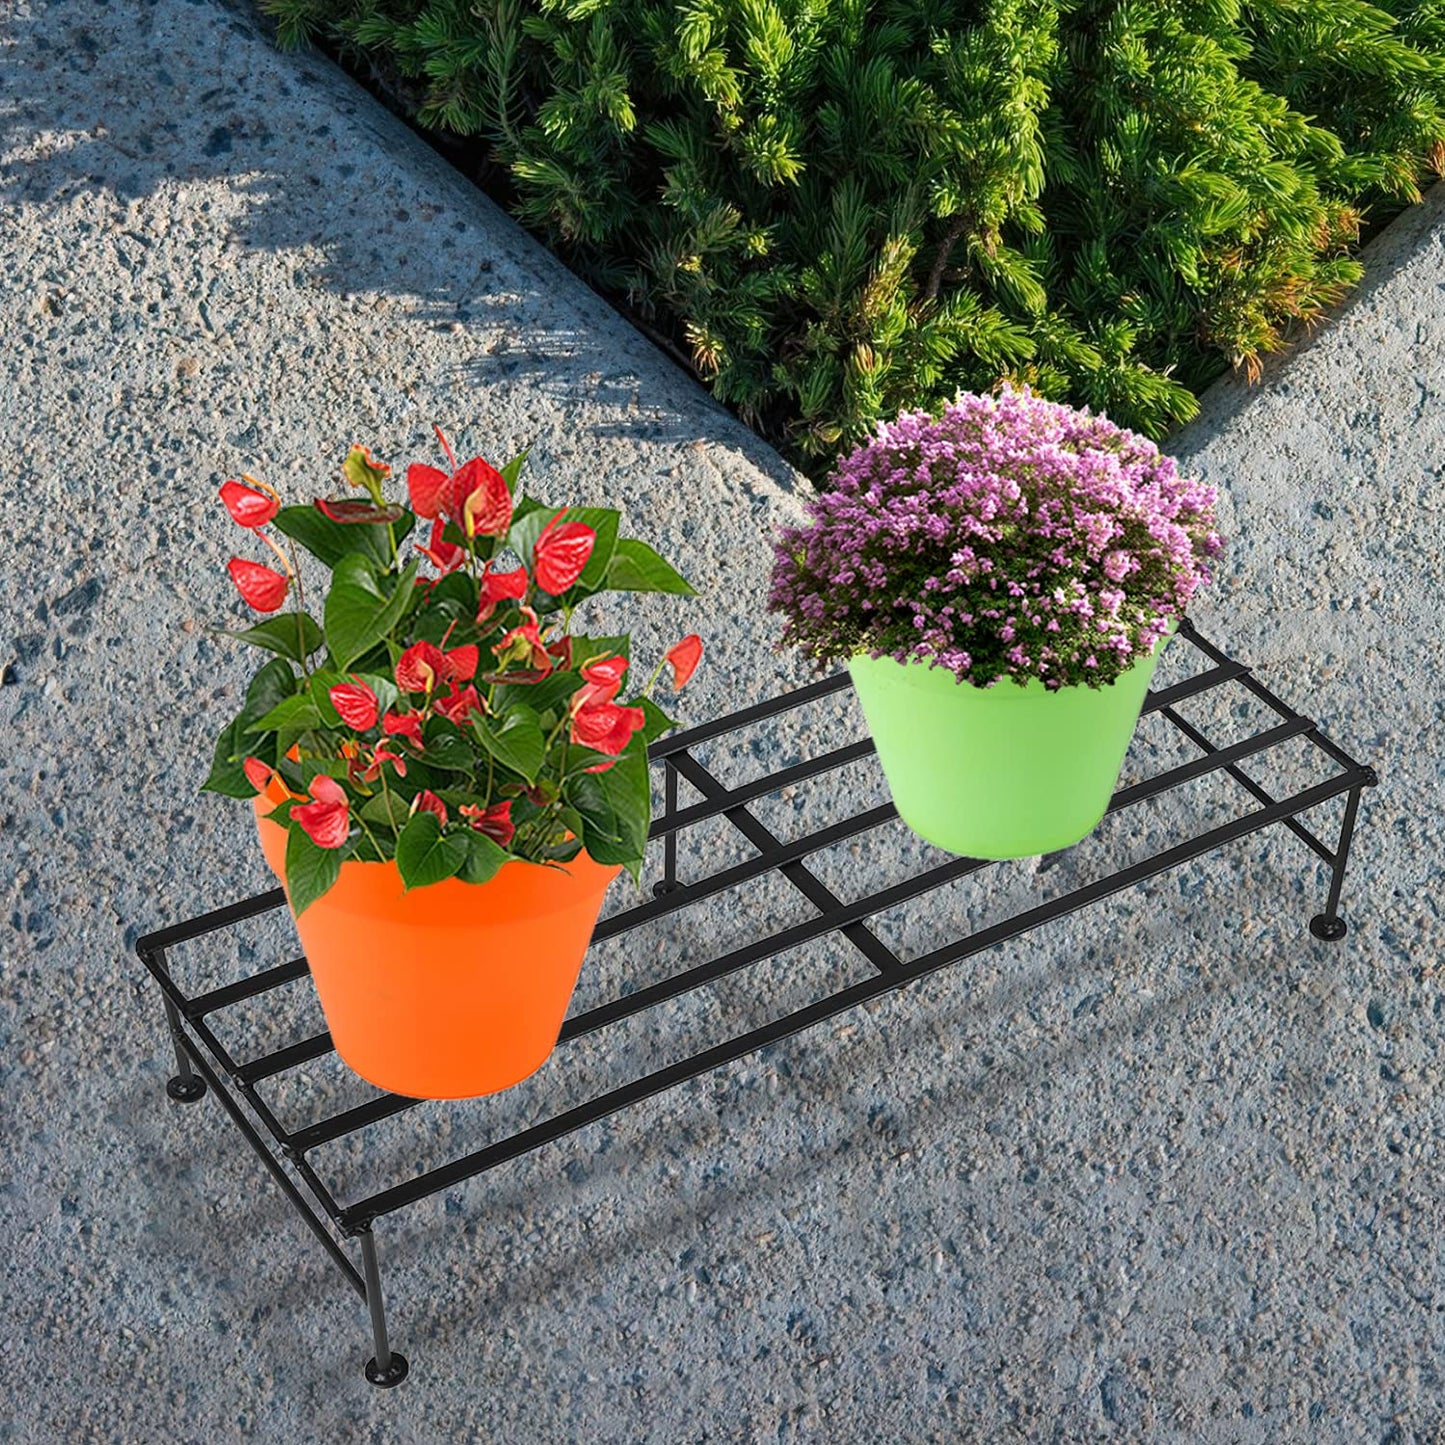 Casa De Amor Rectangular Metal Plant Stand / Pot Stand - 24 inches for Indoor & Outdoor Use (Plants not included)